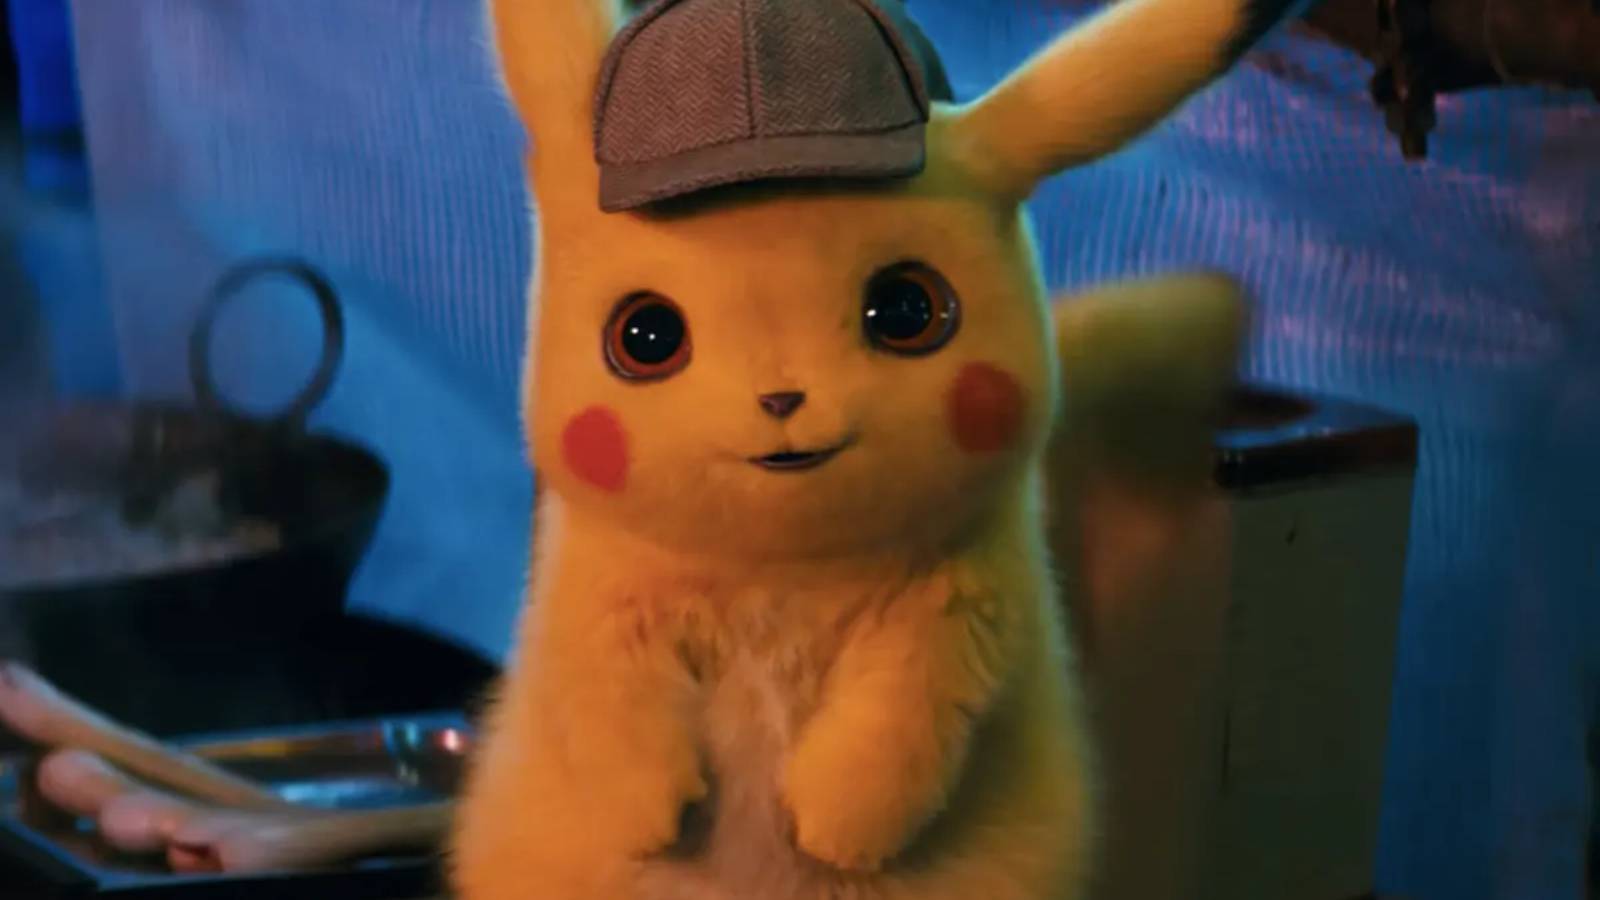 A screenshot from the Detective Pikachu movie shows a realistic looking Pikachu in a market